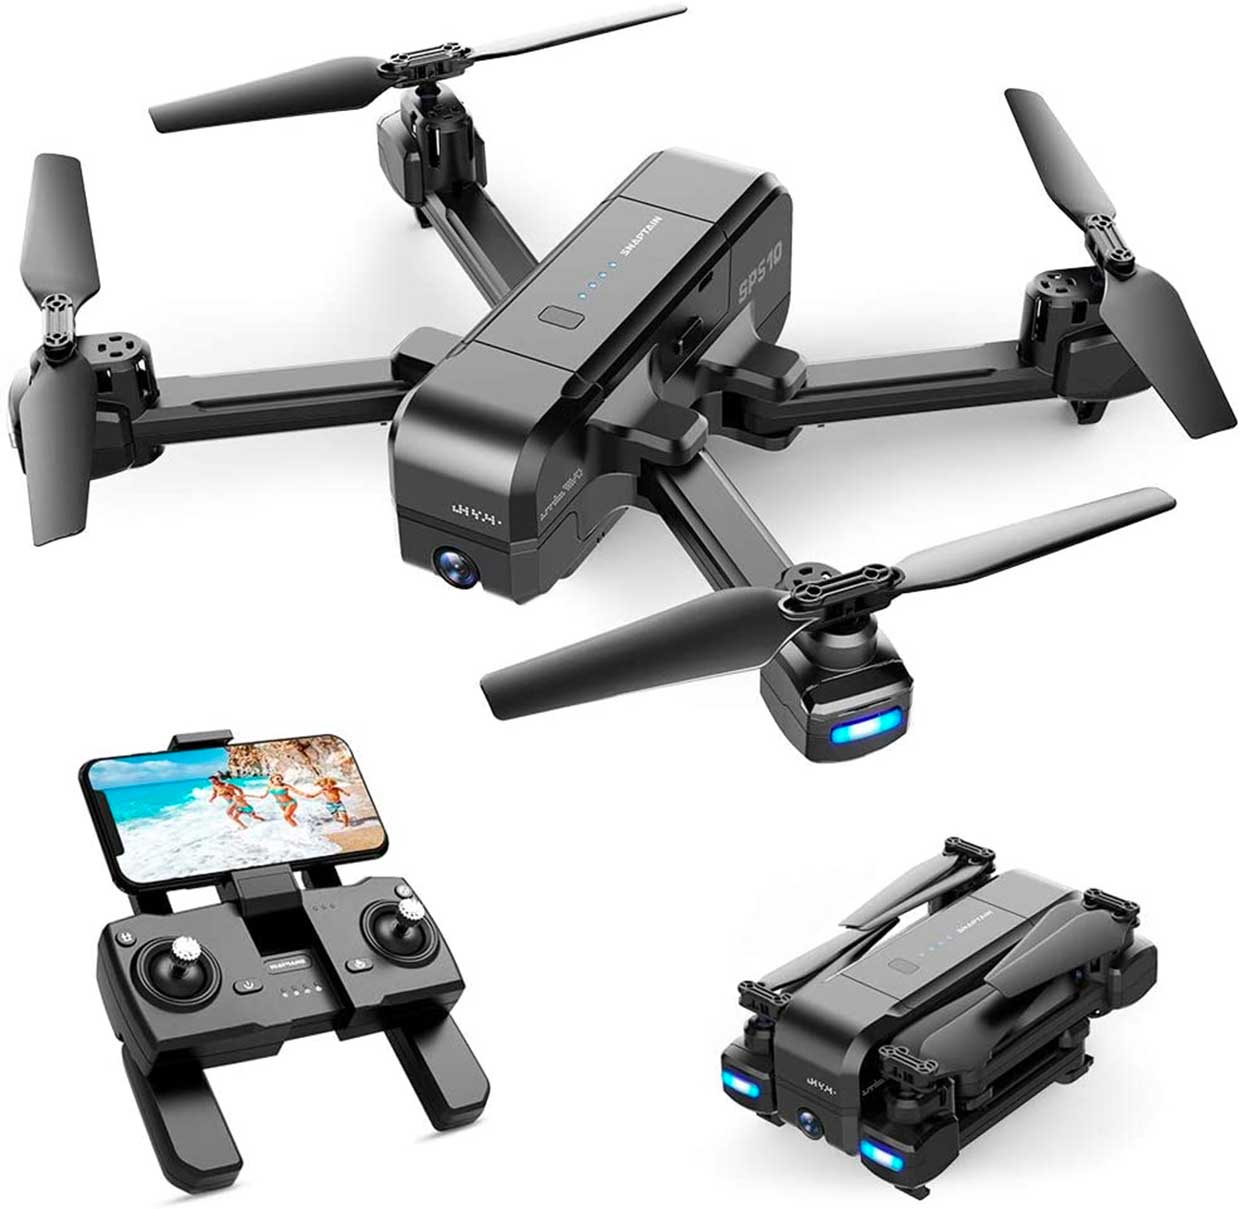 Snaptain SP510 Foldable Drone